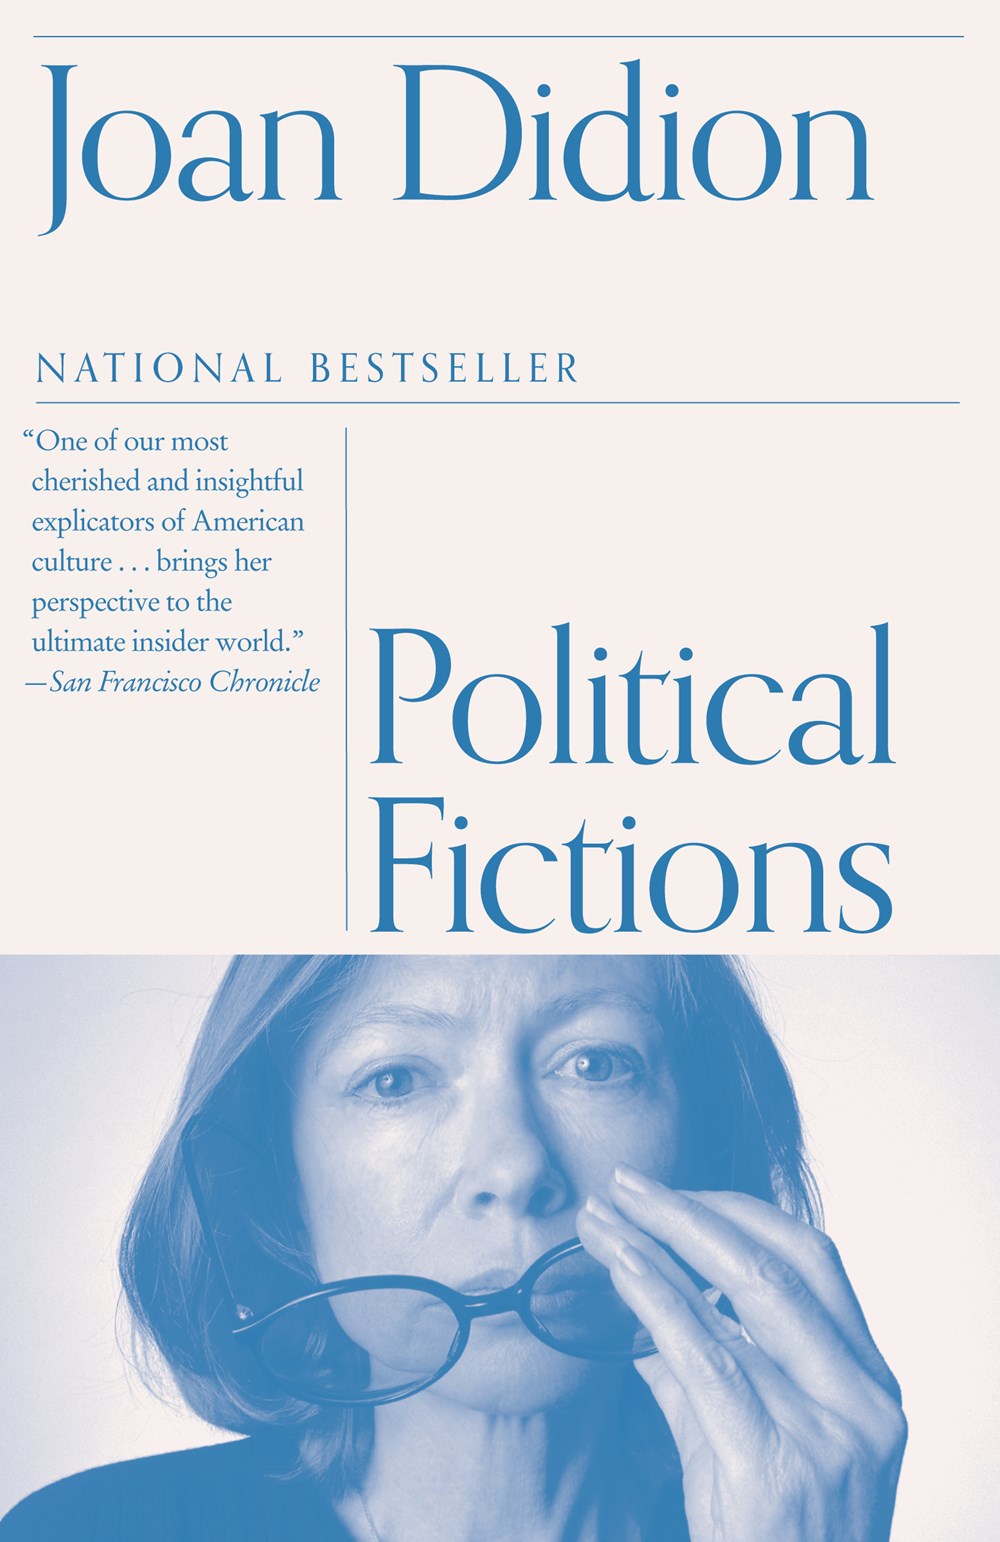 Political Fictions by Joan Didion